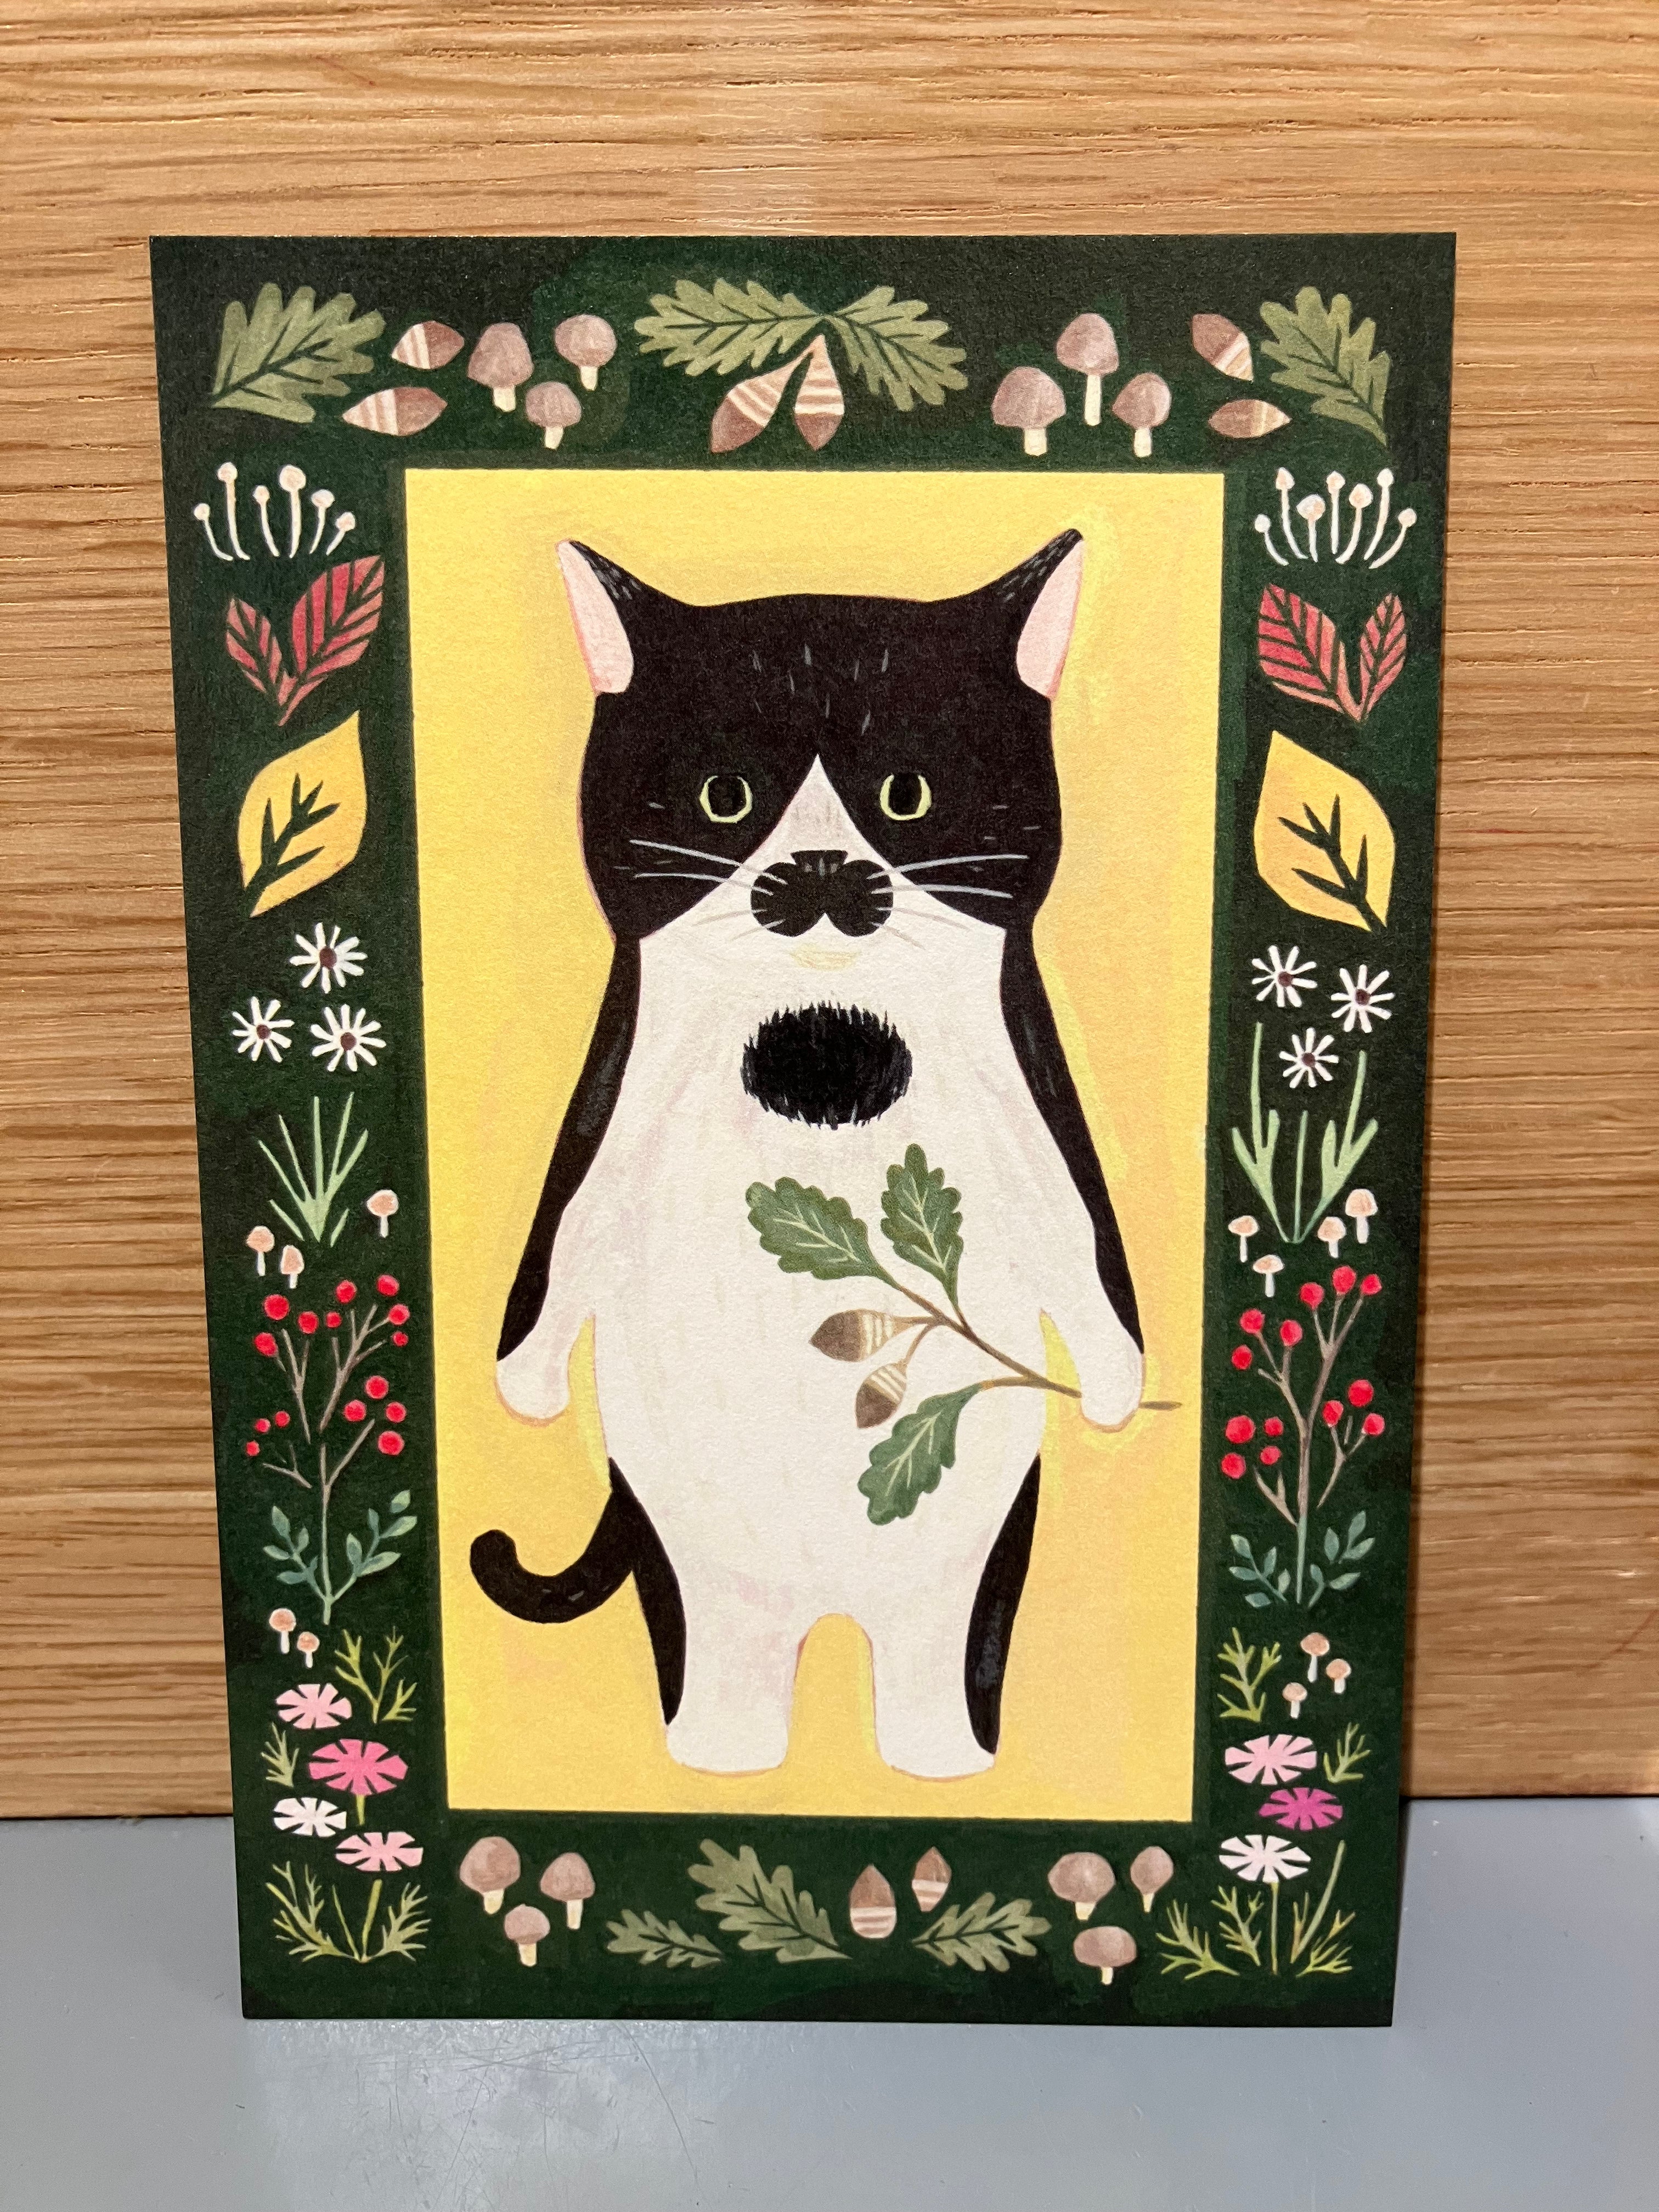 Japanese card with white and black cat holding a twig